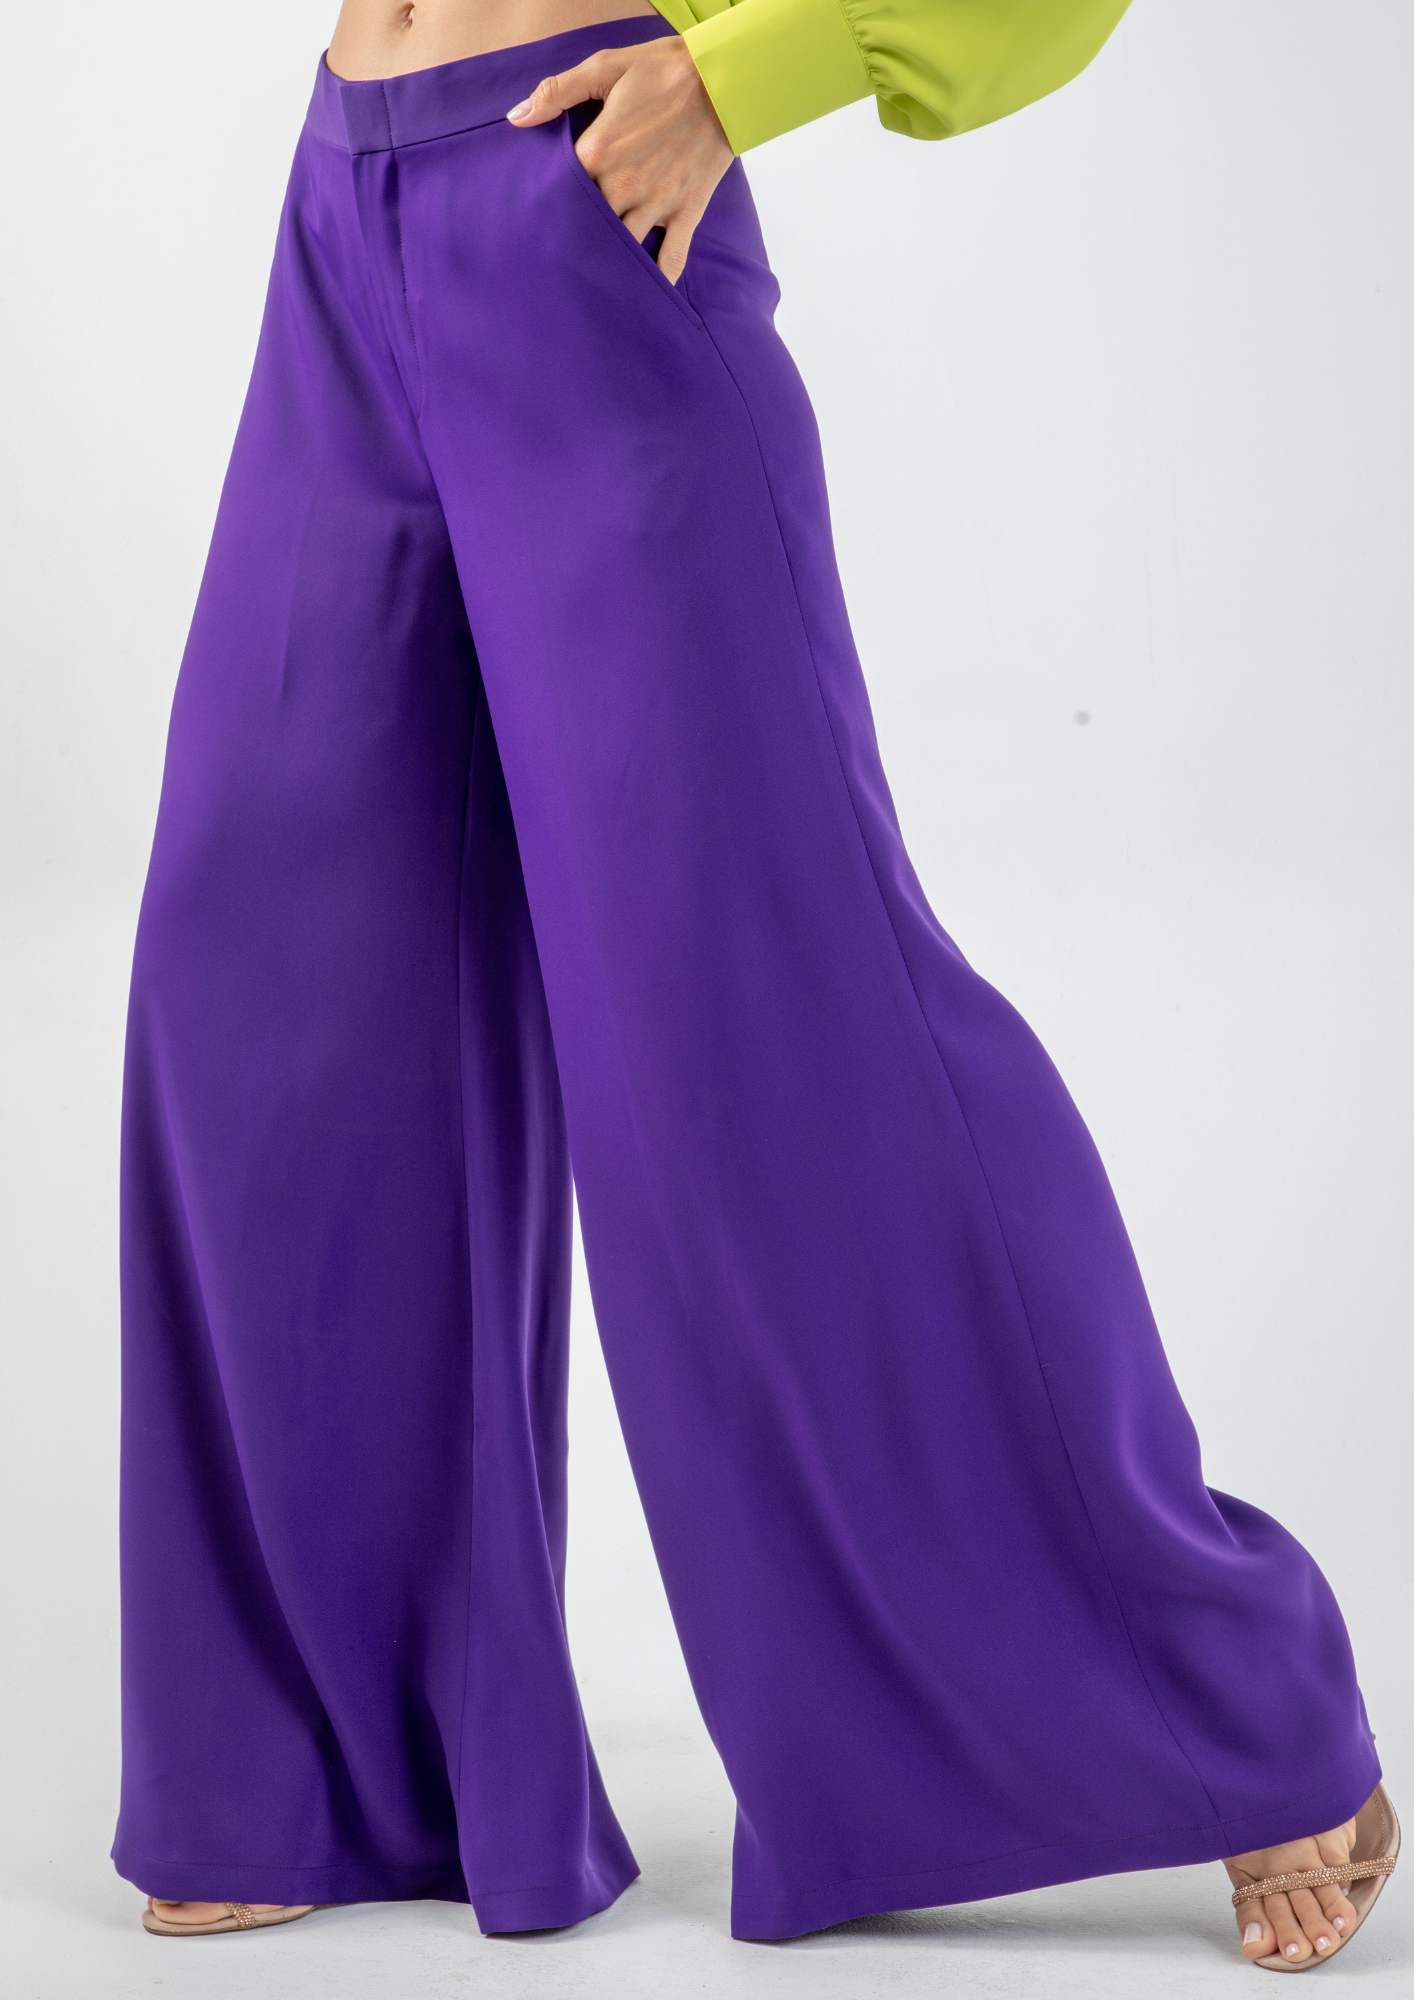 Sale on 44 Palazzo Pants offers and gifts | Stylight